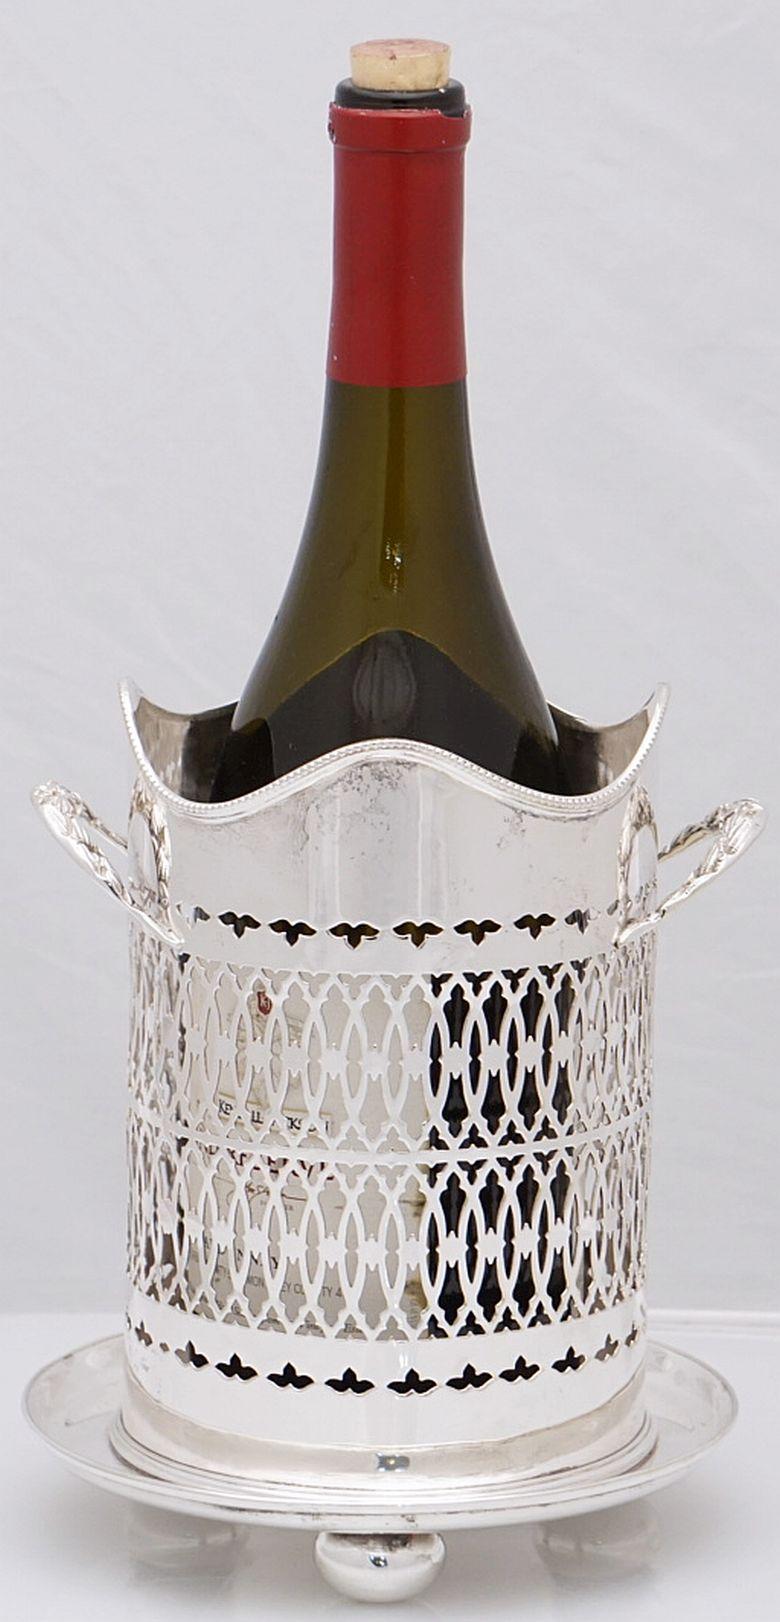 A handsome English wine bottle display holder or coaster of fine plate silver, featuring a rolled serpentine edge around the top, with an elegant pierced design around the circumference and opposing handles, and raised cylindrical base with ball